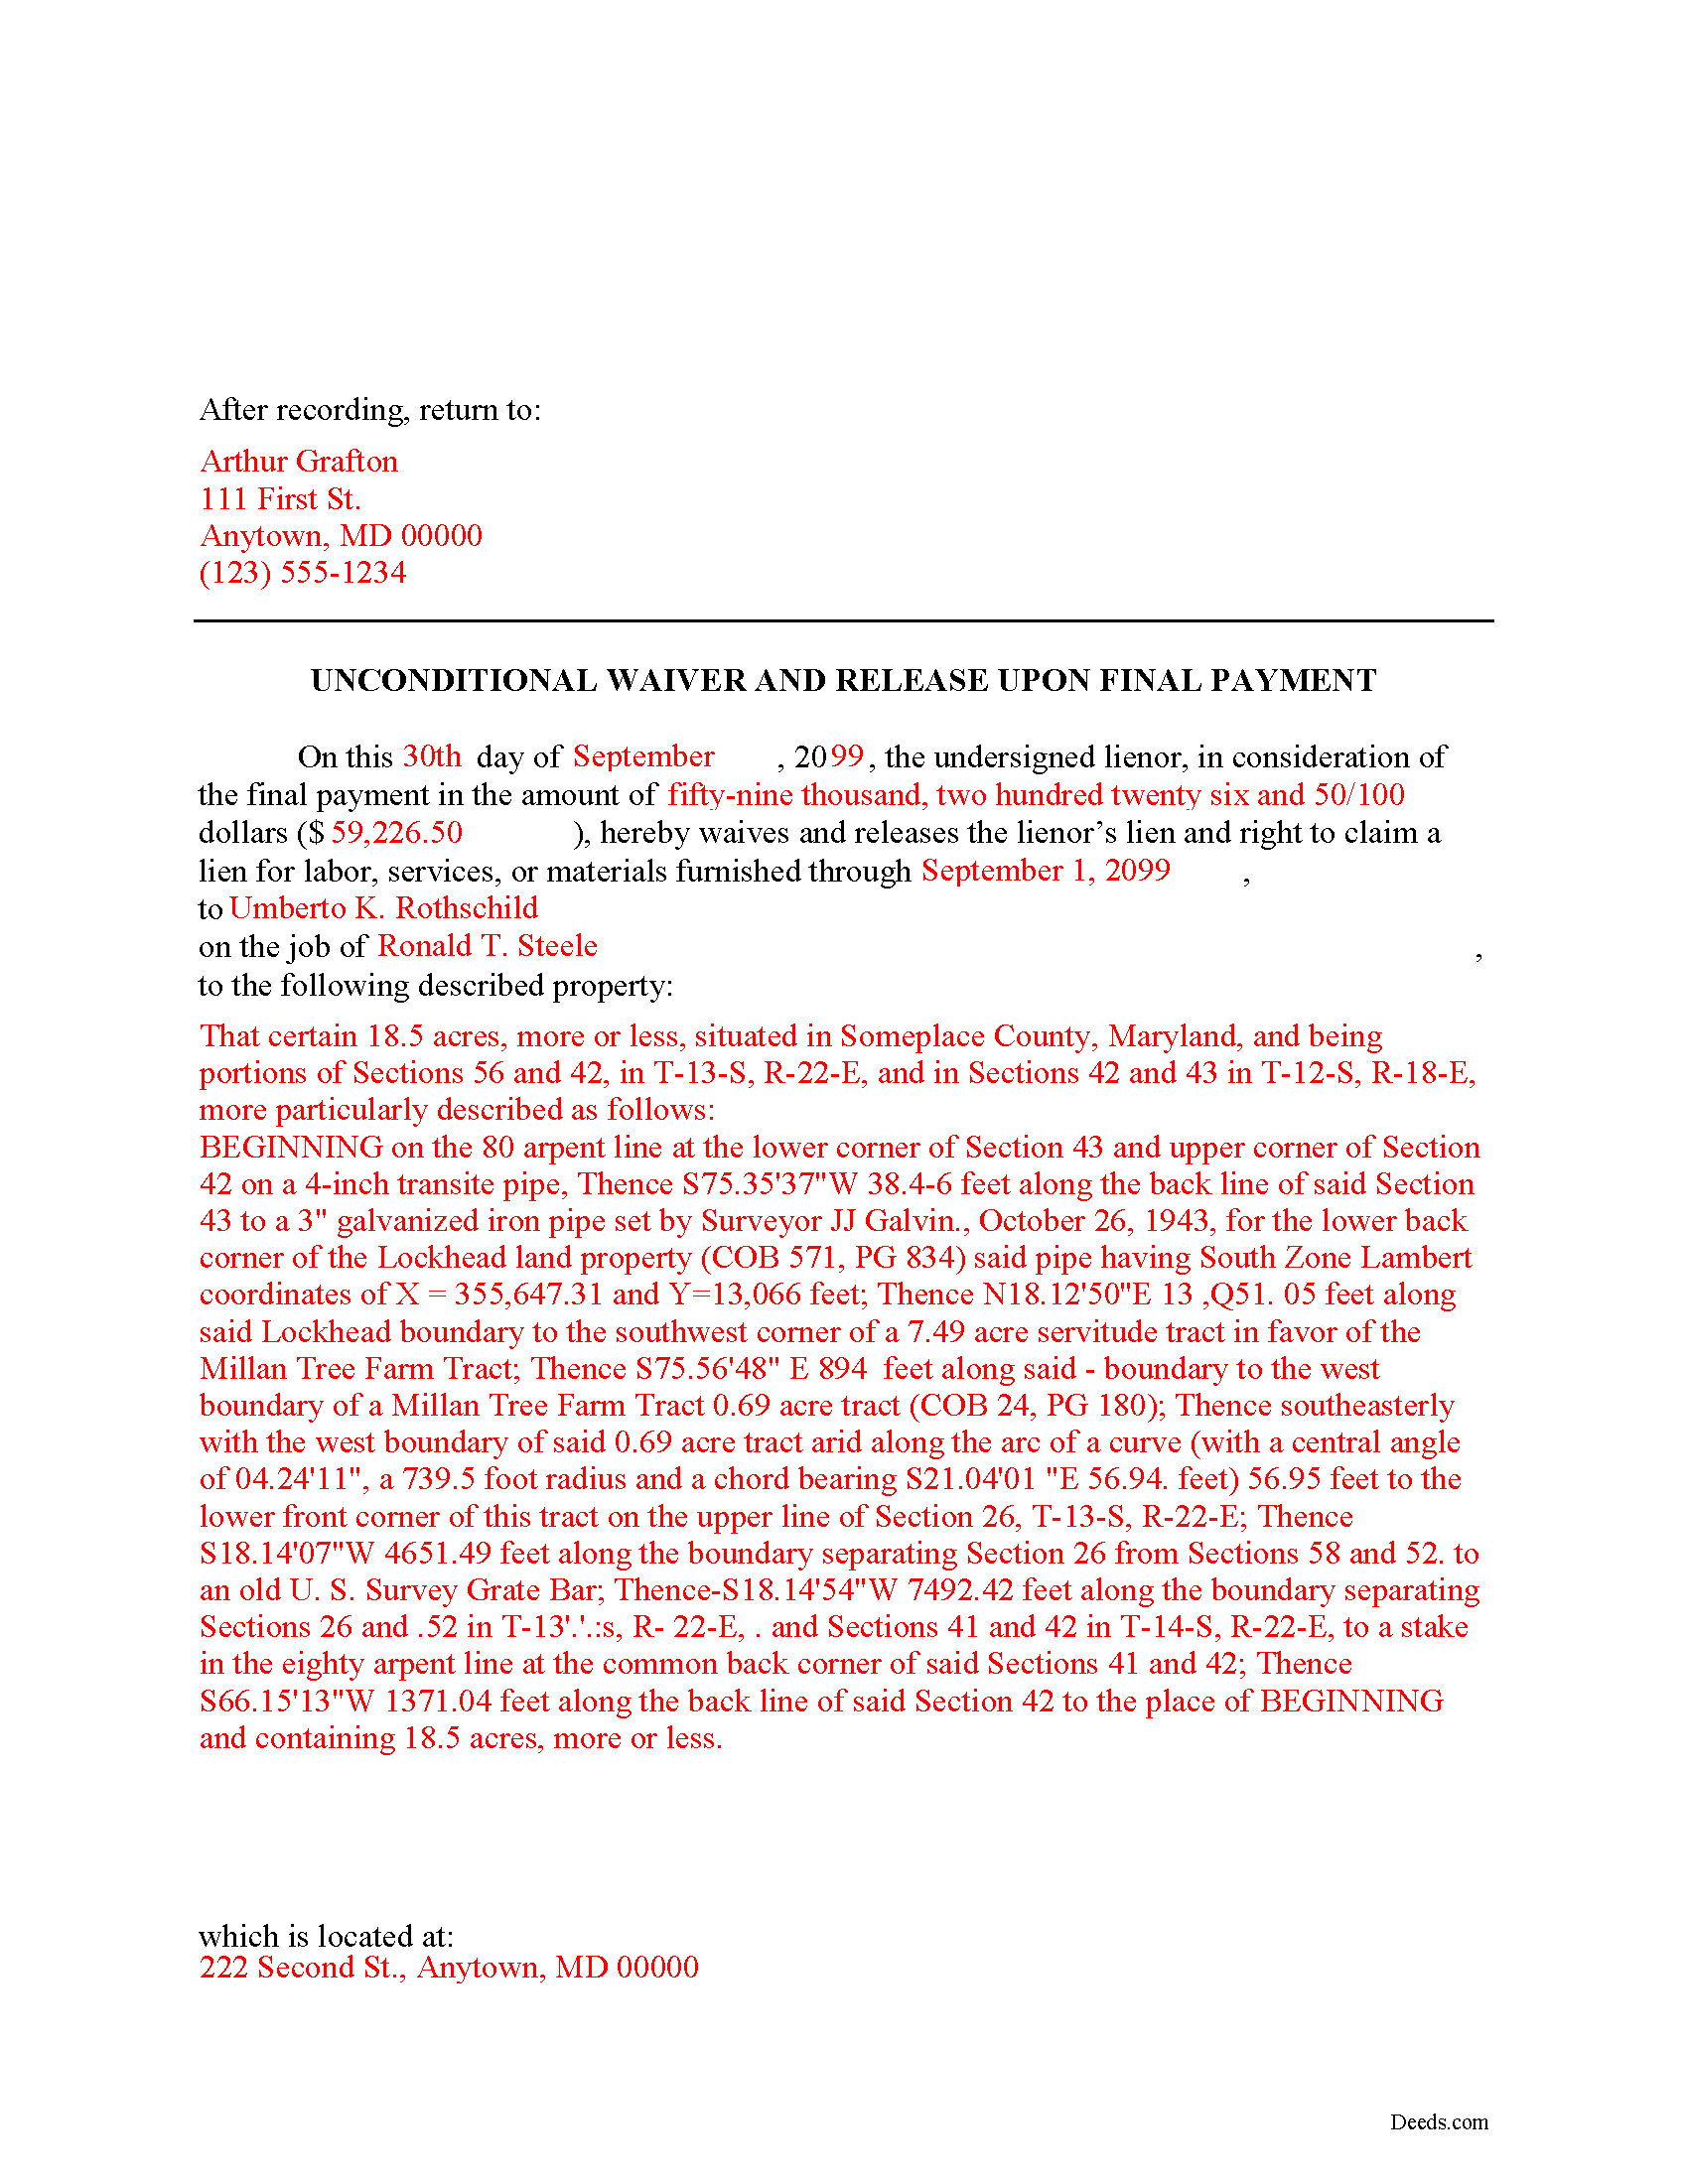 Completed Example of the Unconditional Lien Waiver on Final Payment Document